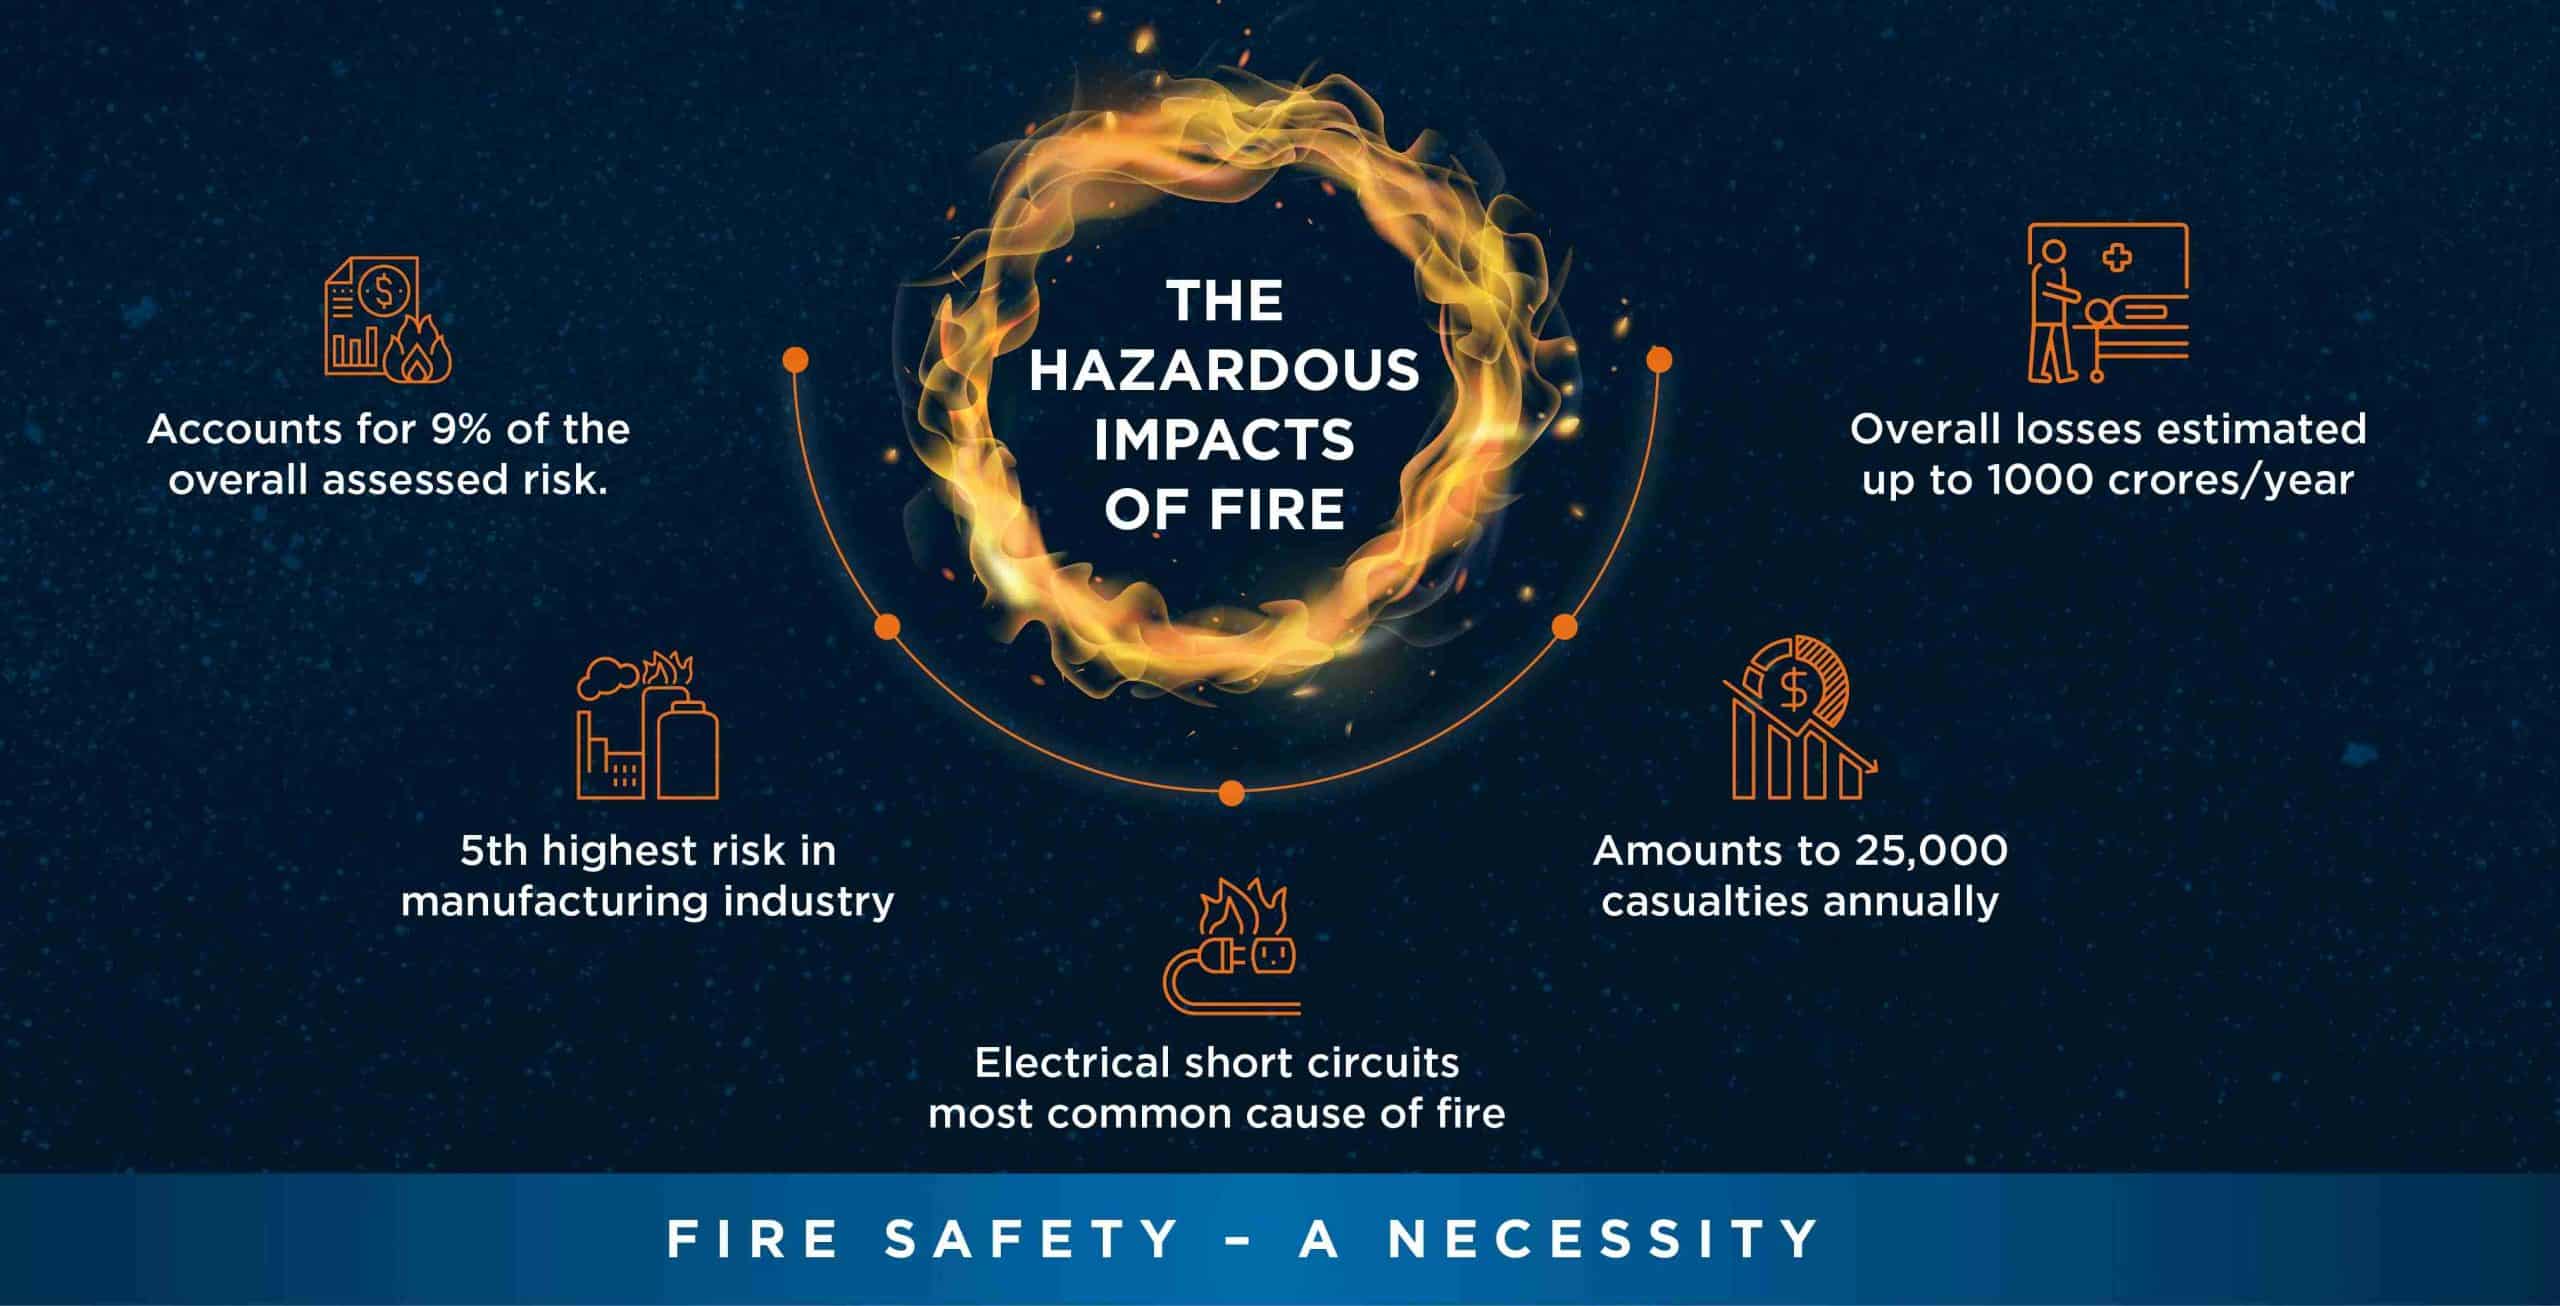 creative images showing the hazardous impacts of fire in any premises